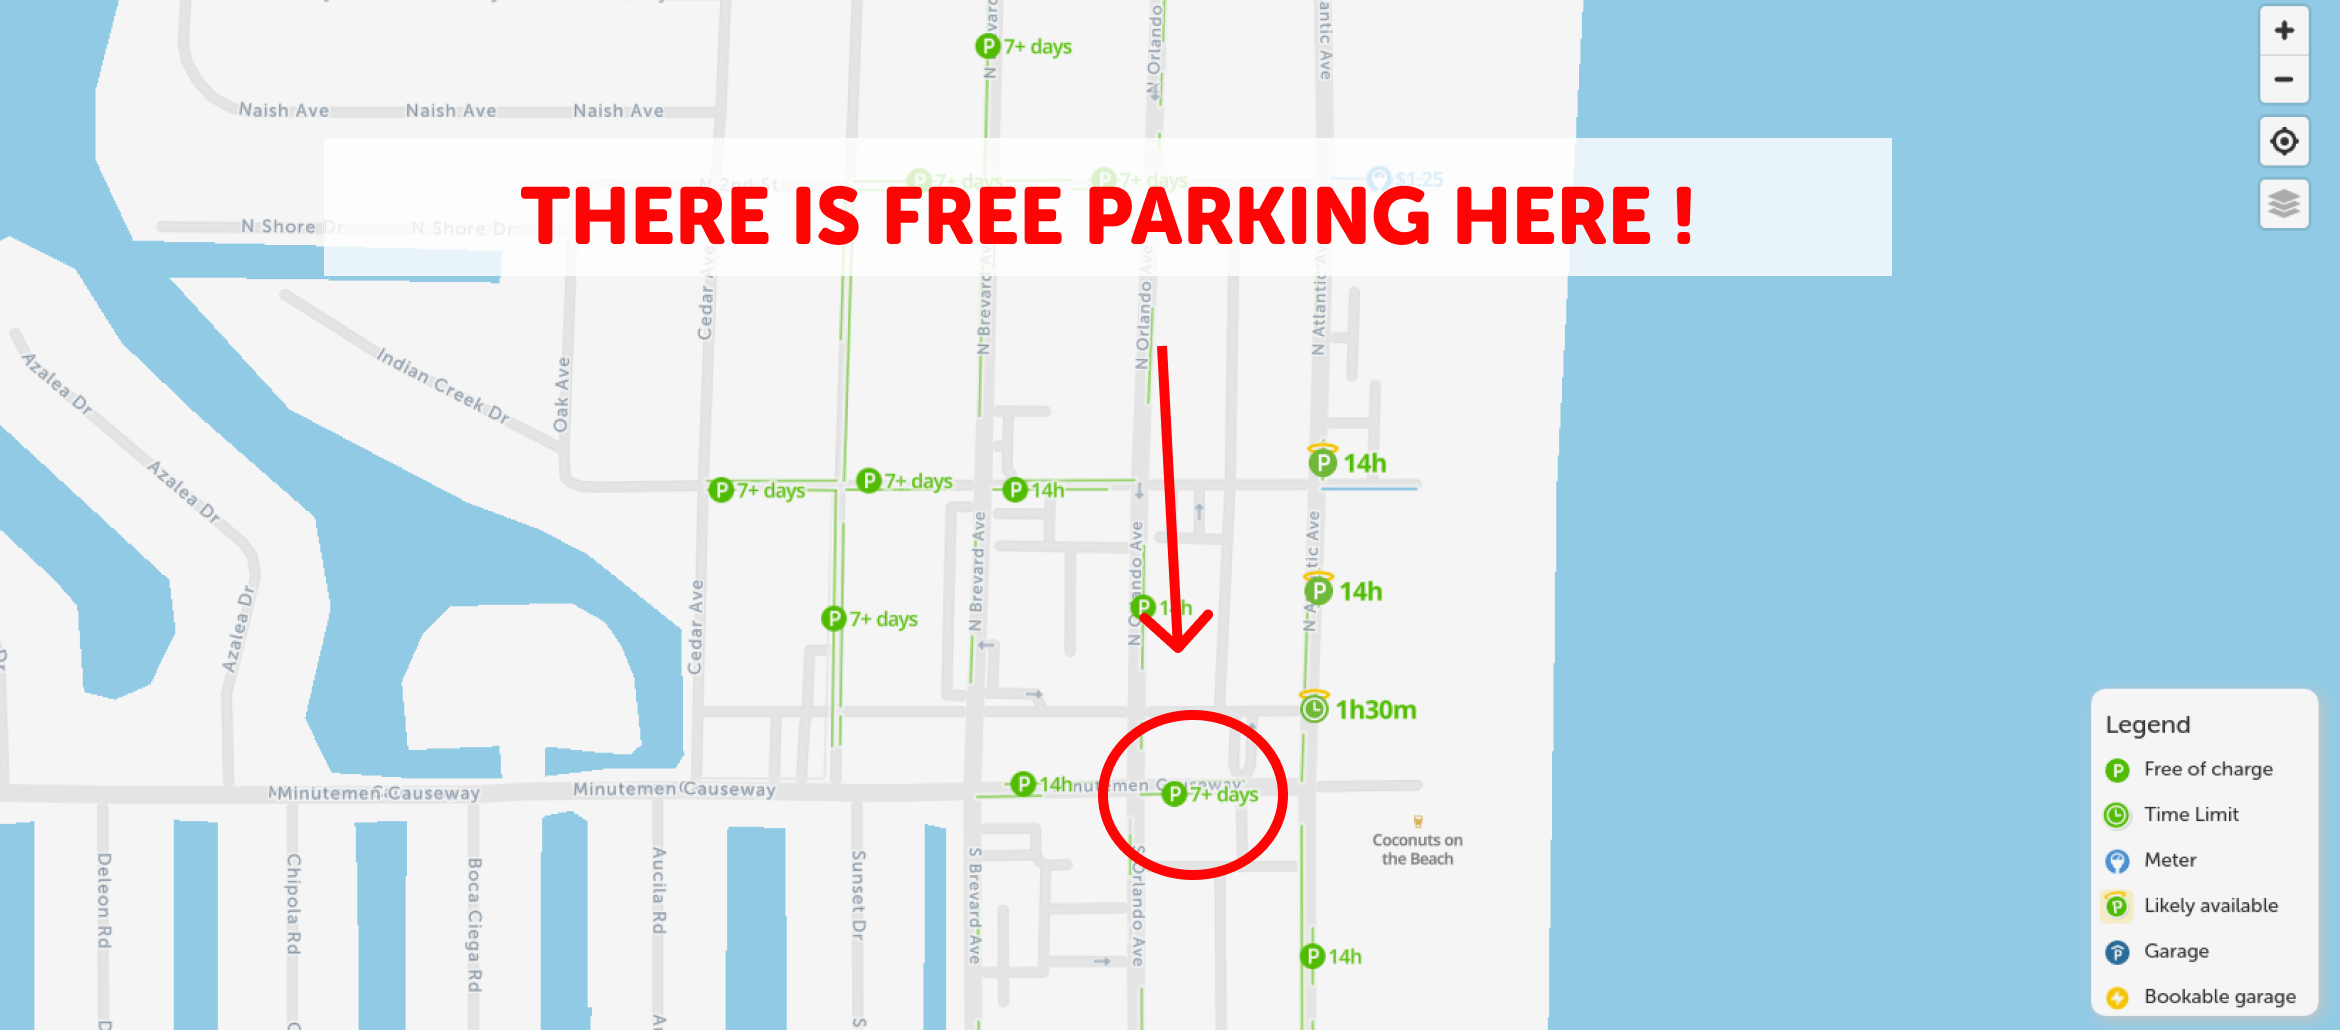 map of free parking in Cocoa beach - SpotAngels